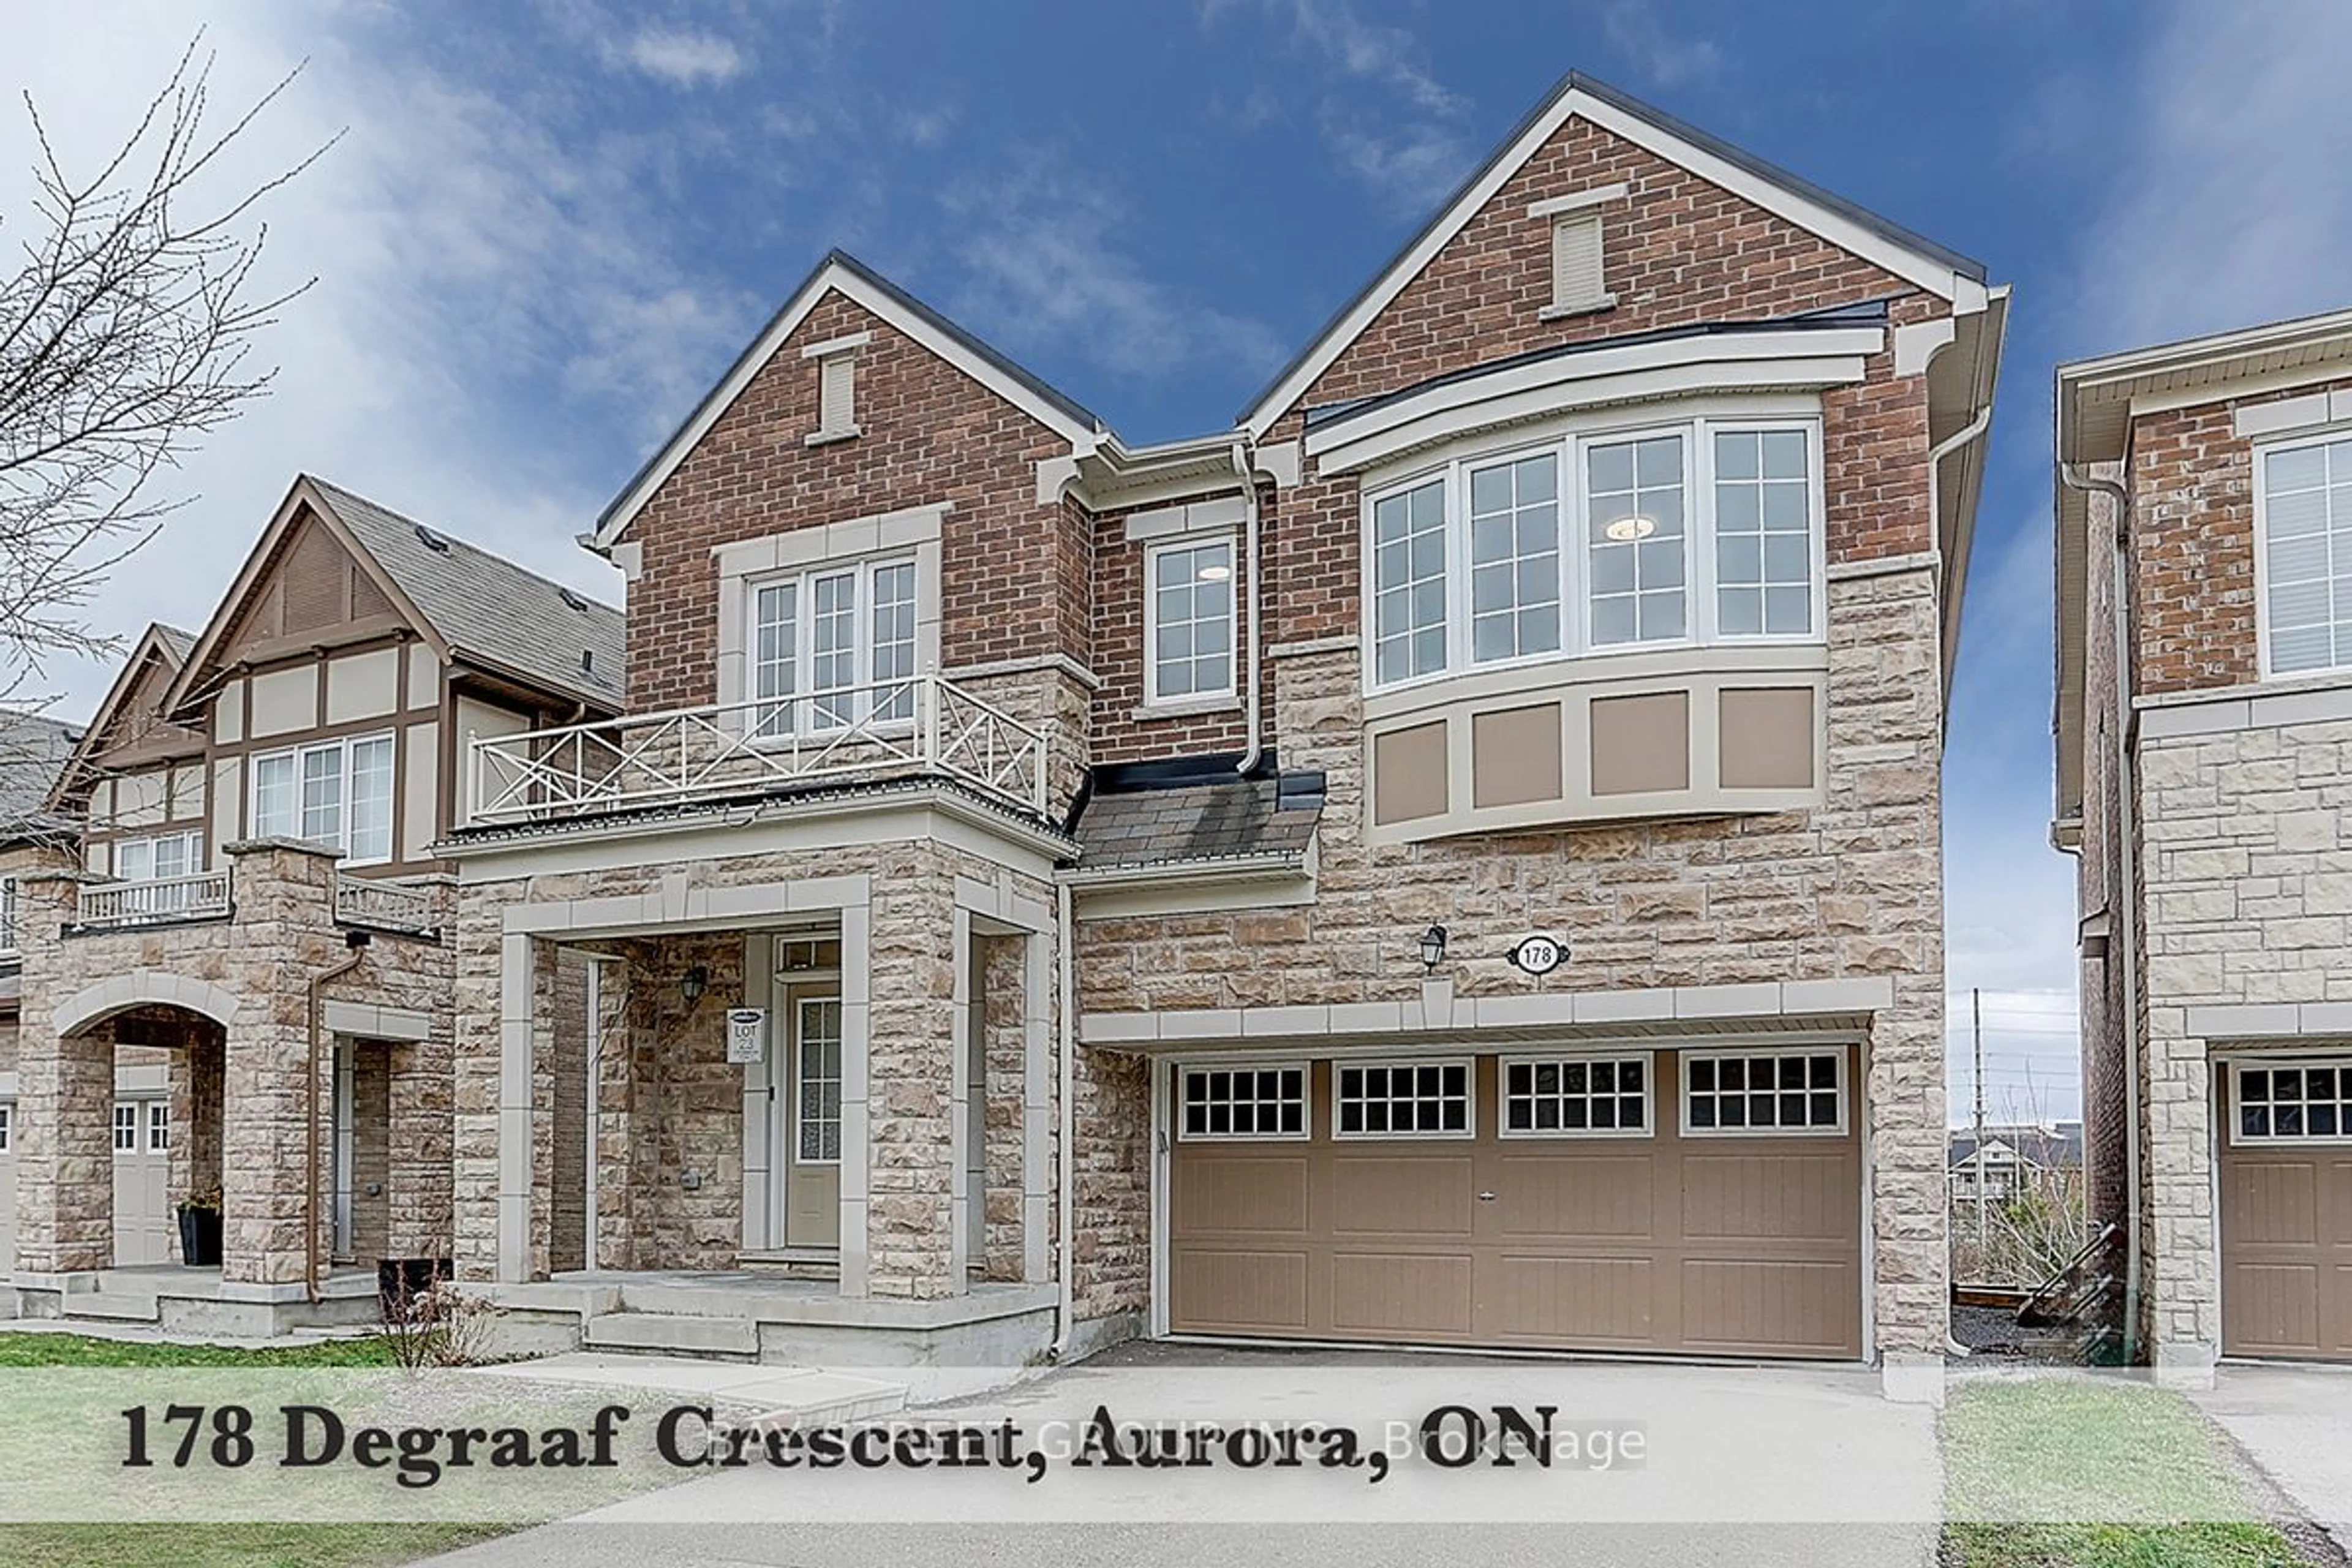 Home with brick exterior material for 178 Degraaf Cres, Aurora Ontario L4G 0X1